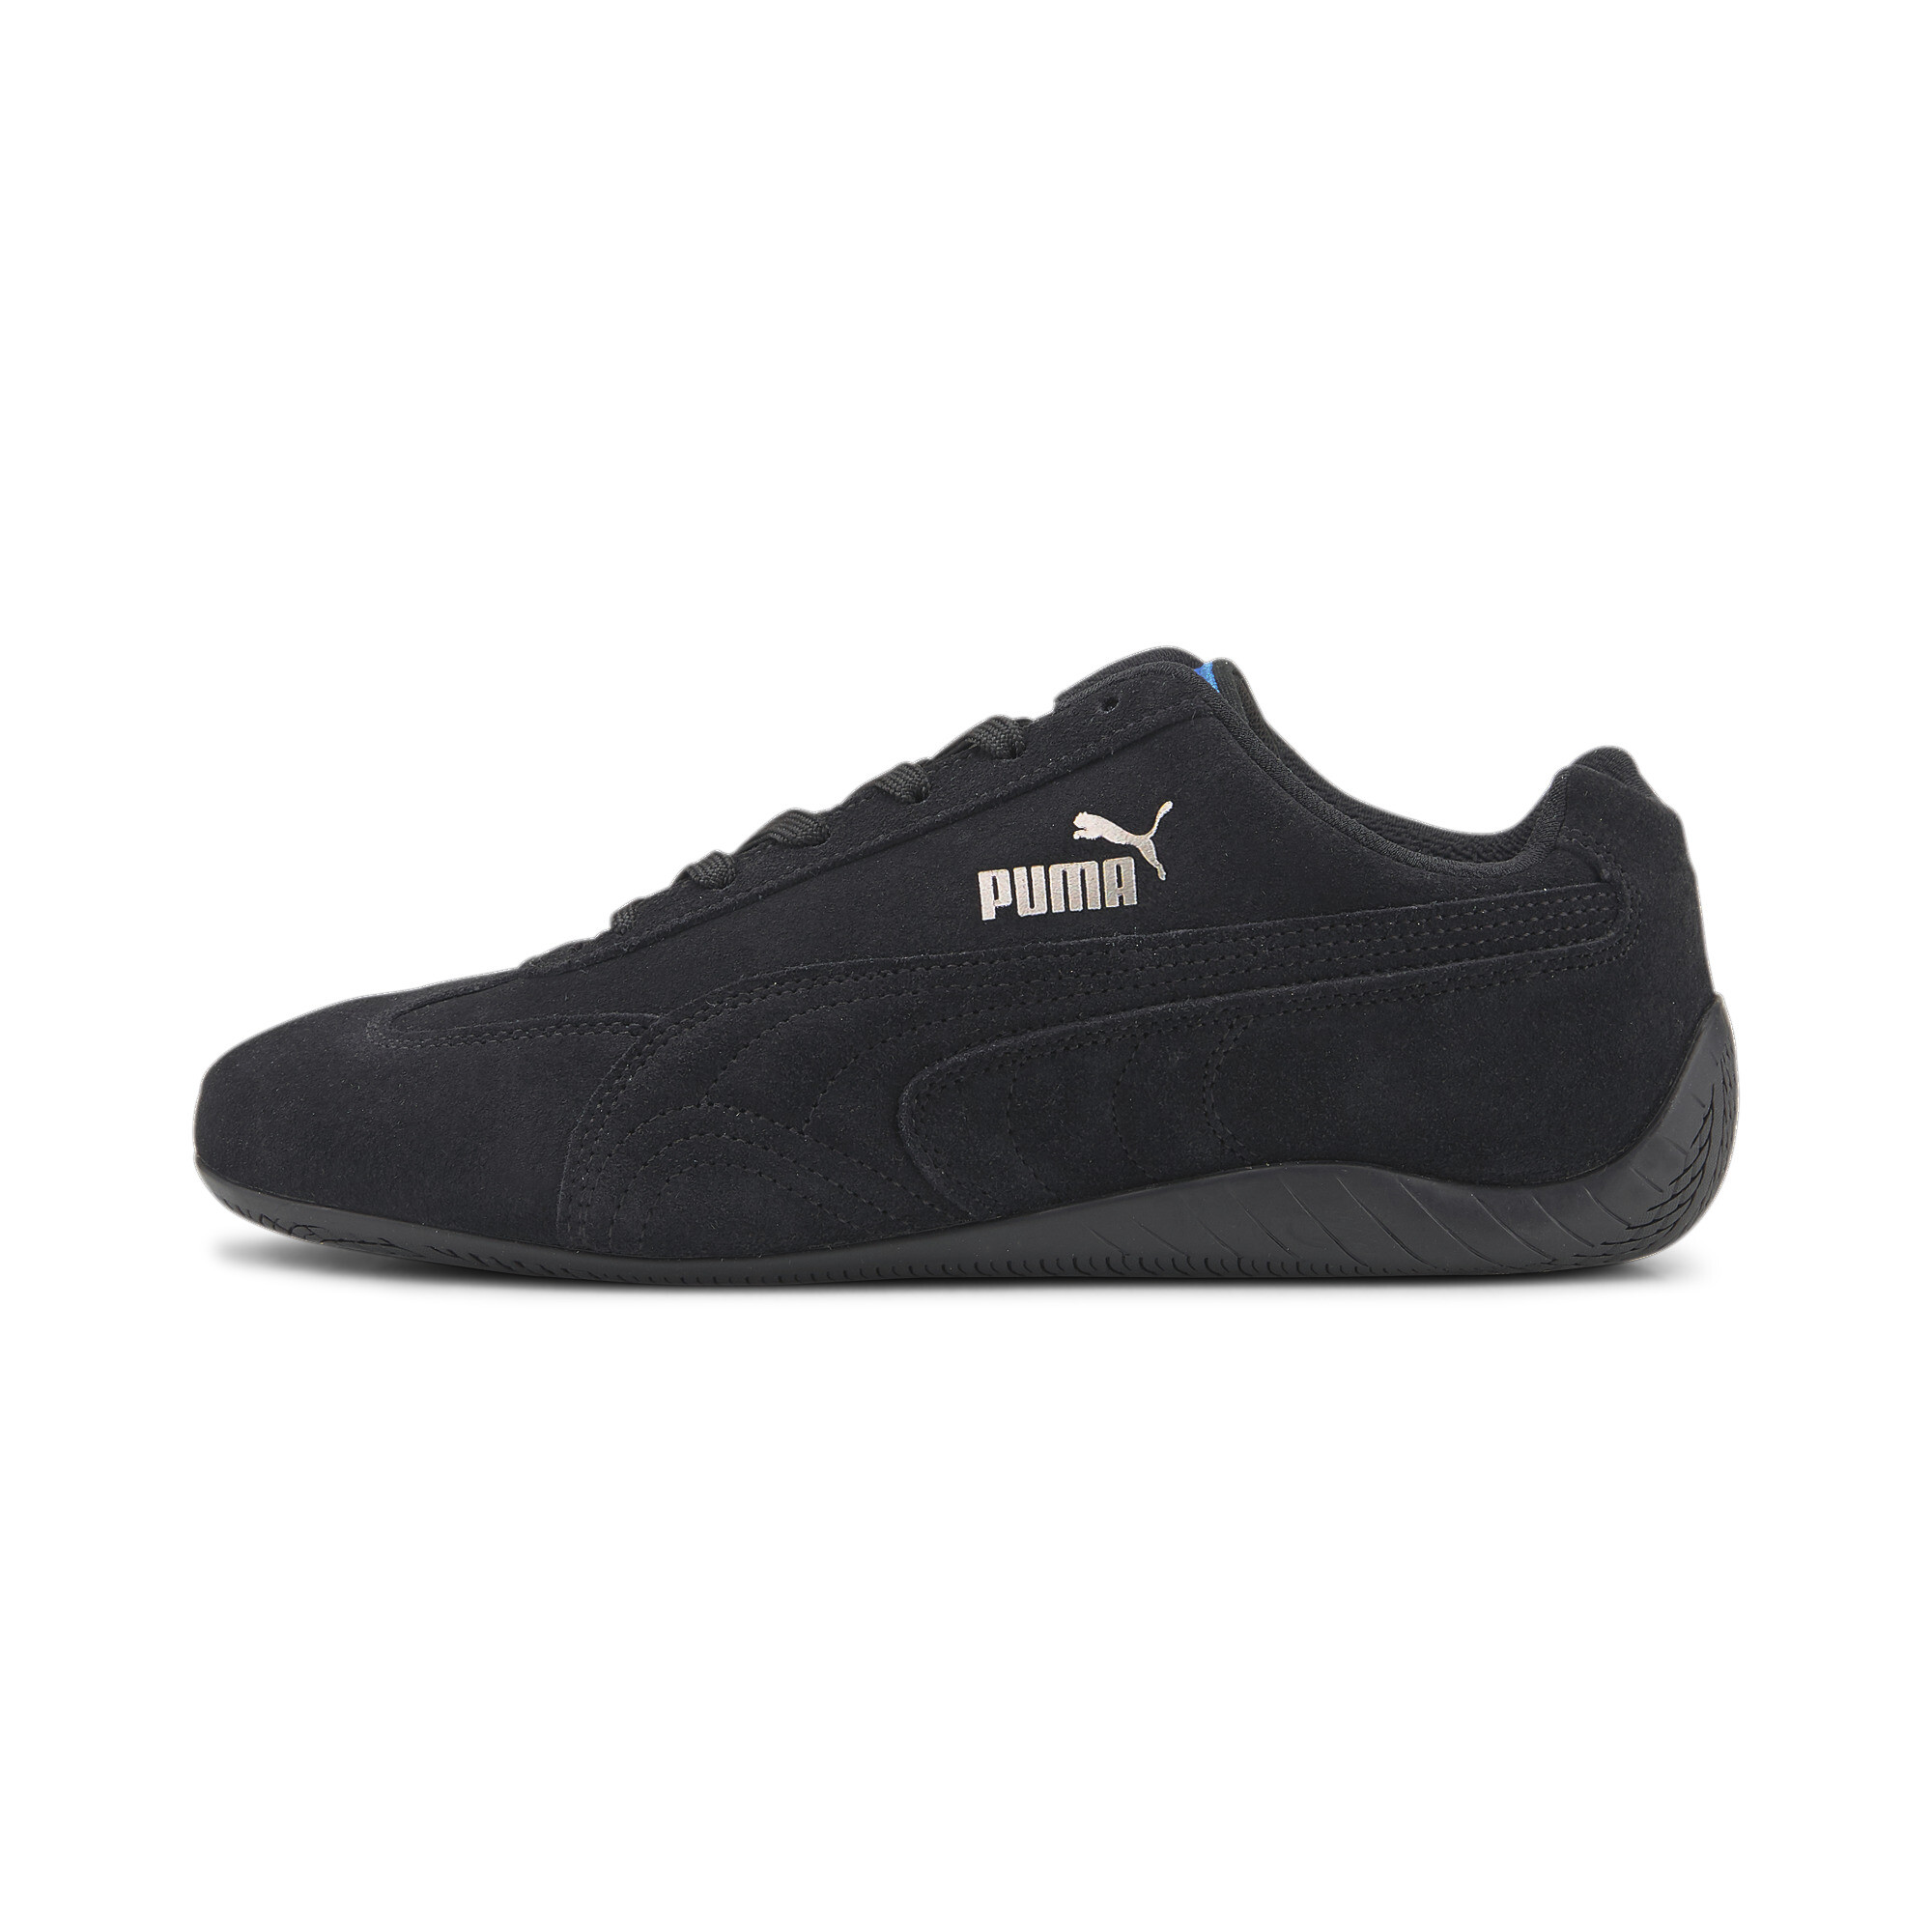 PUMA X SPARCO Speedcat OG Driving Shoes Motorsport Trainers Lace Up Unisex EBay